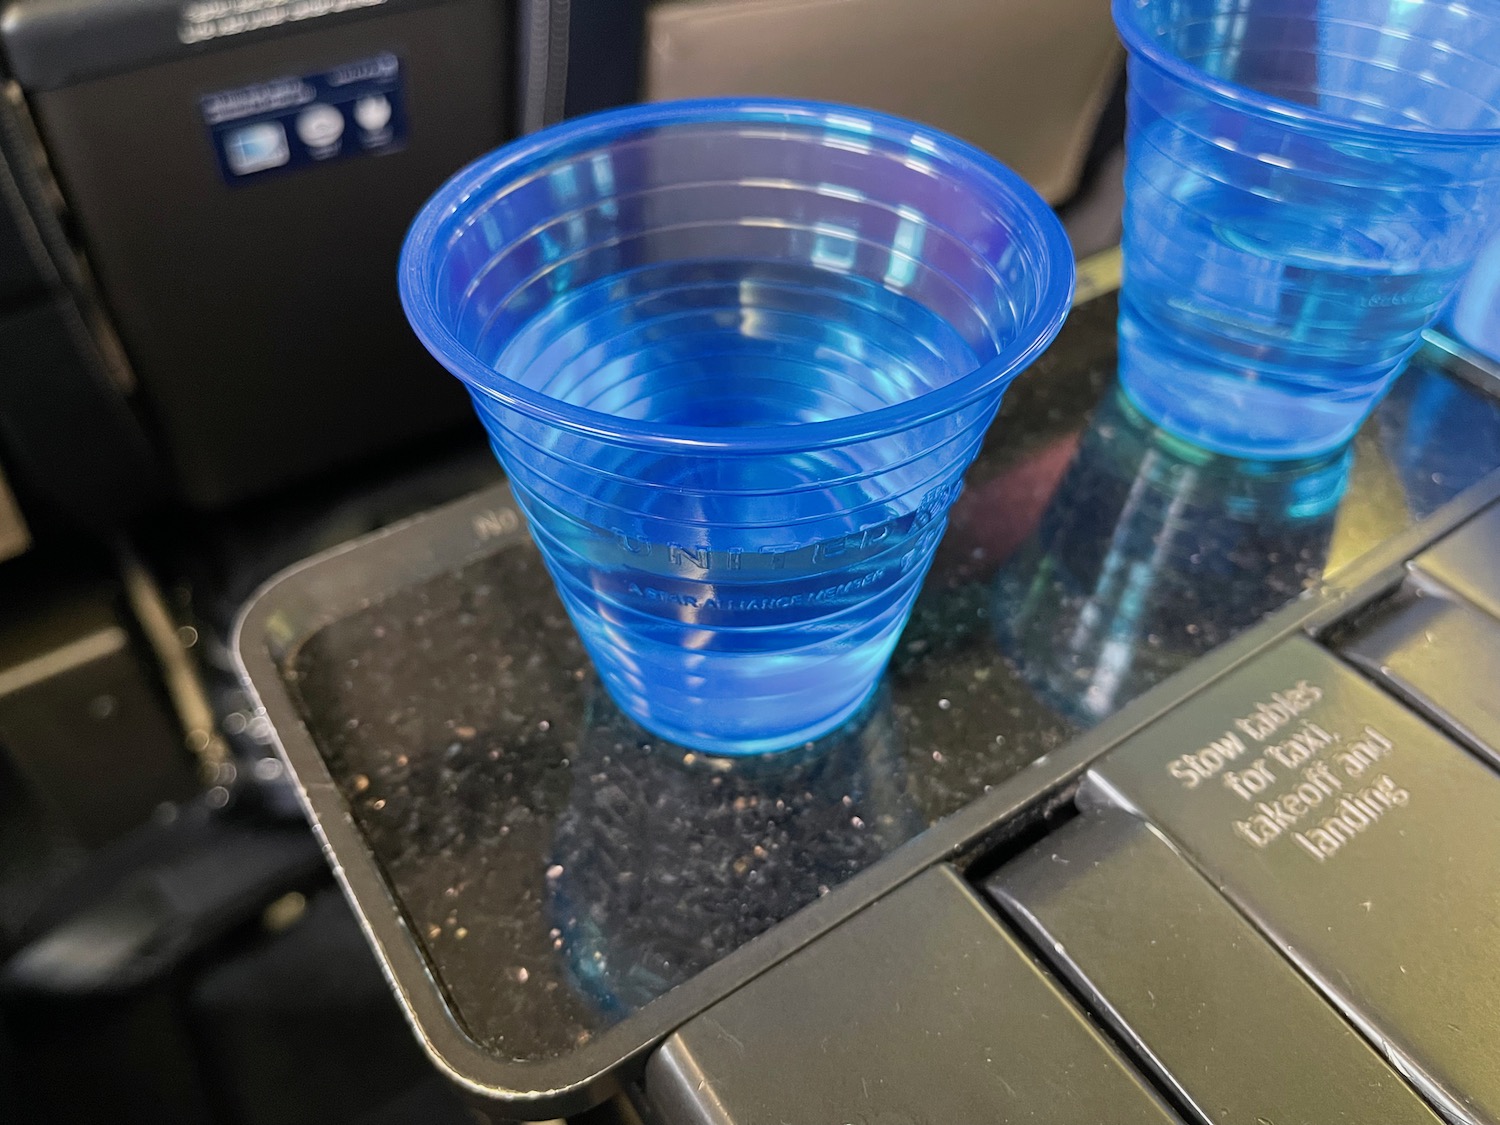 a pair of blue plastic cups on a tray